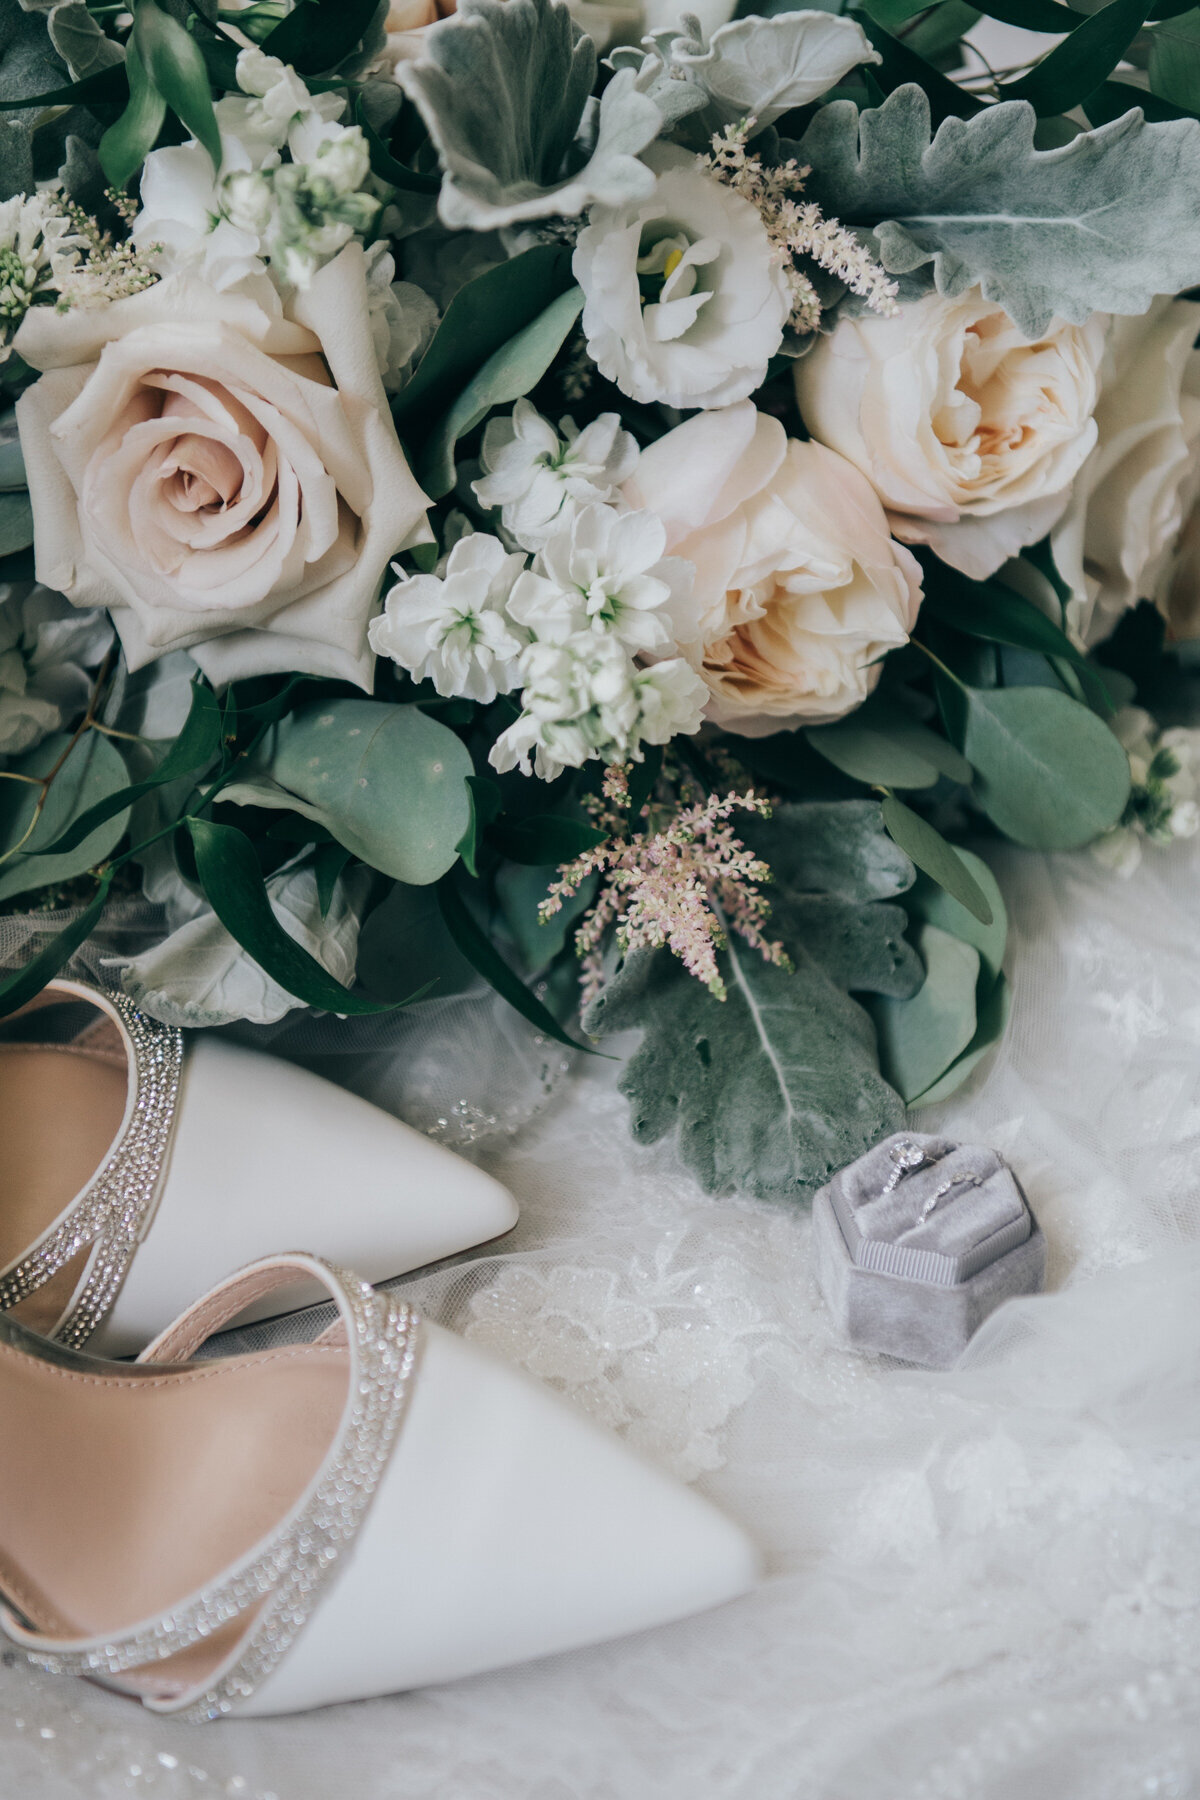 Bridal detail photos with the bride's shoes, bouquet and wedding rings